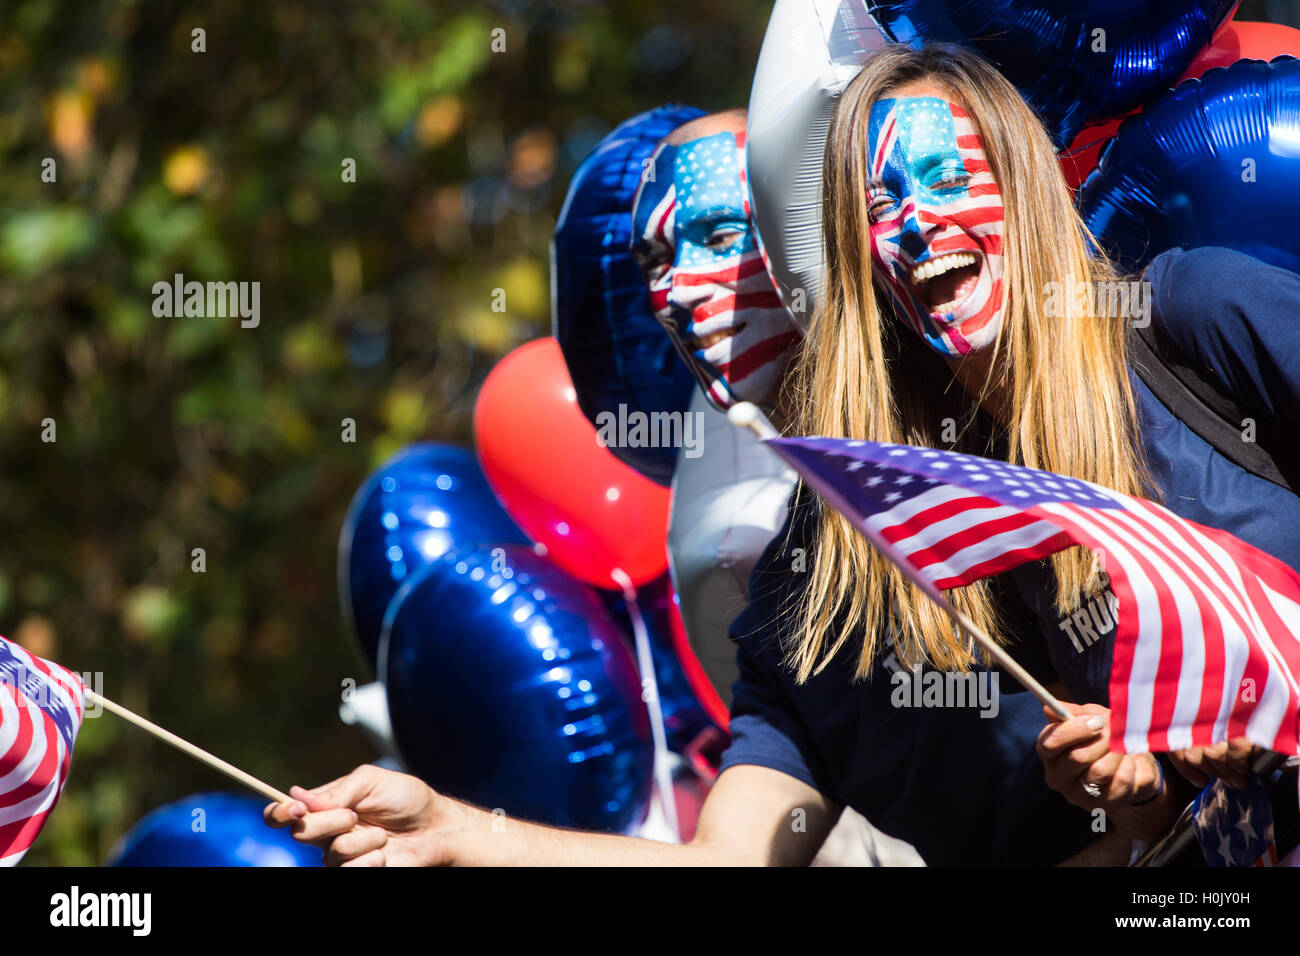 London, September 21st 2016. A "Stop Trump" open topped red London double-decker bus tours central London in a bid to encourage US expats to vote for Clinton. XXXX. Credit:  Paul Davey/Alamy Live News Stock Photo